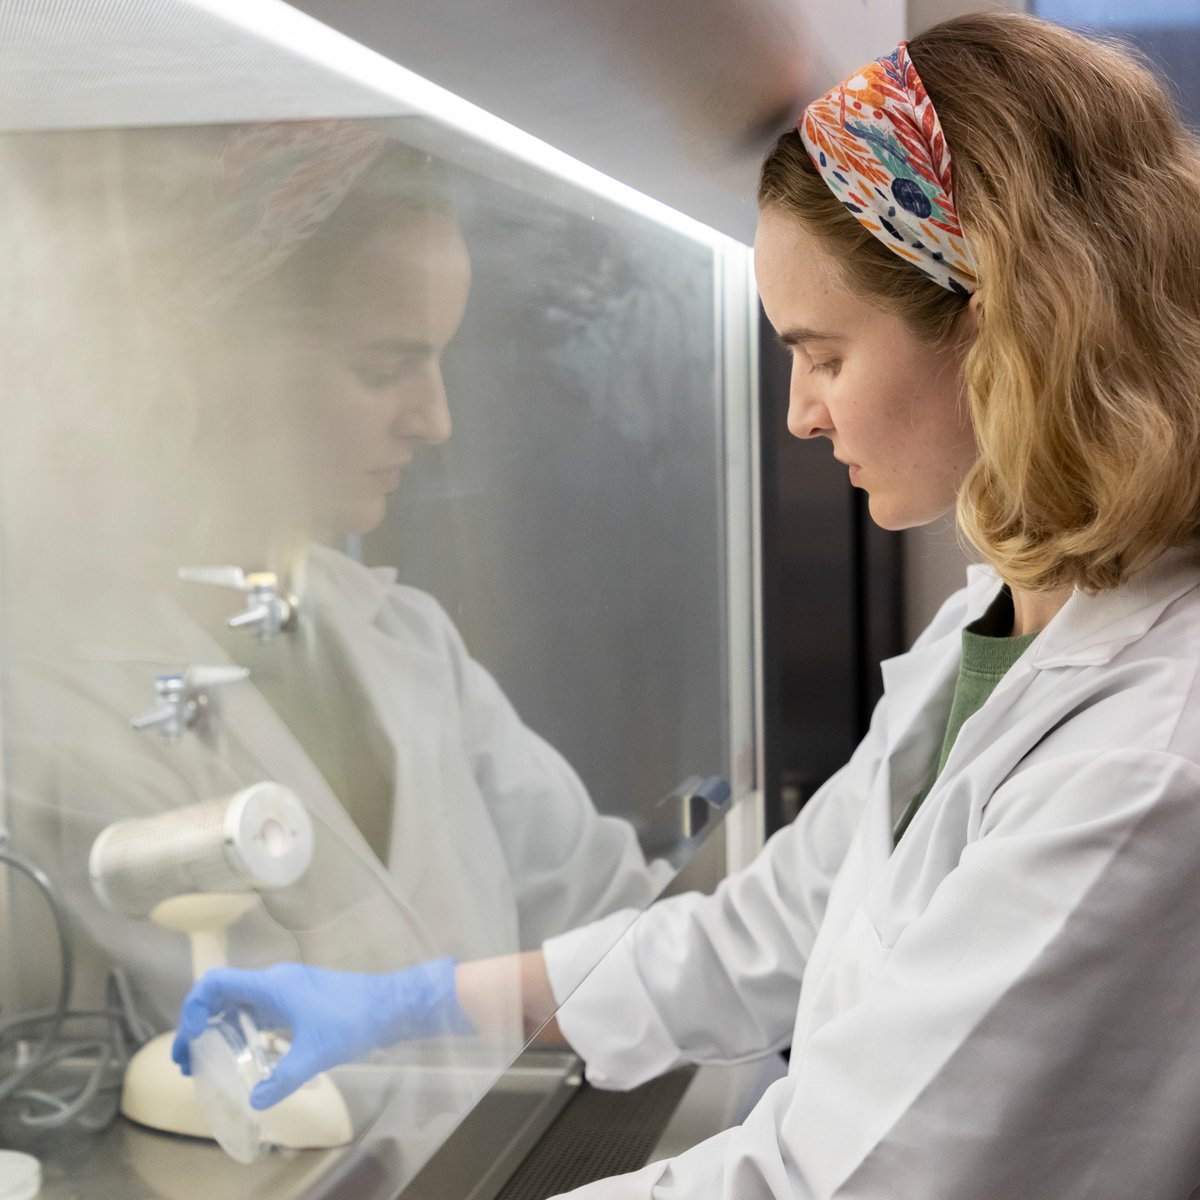 Kona Swift, an @ArkansasEPP Ph.D. student in Prof. Burt Bluhm's plant pathology lab, researches fungal pathogens affecting #soybeans, aiming to prevent disease. Her favorite parts of grad school: learning new skills & making an impact through her work. @AginArk #AgFoodLife